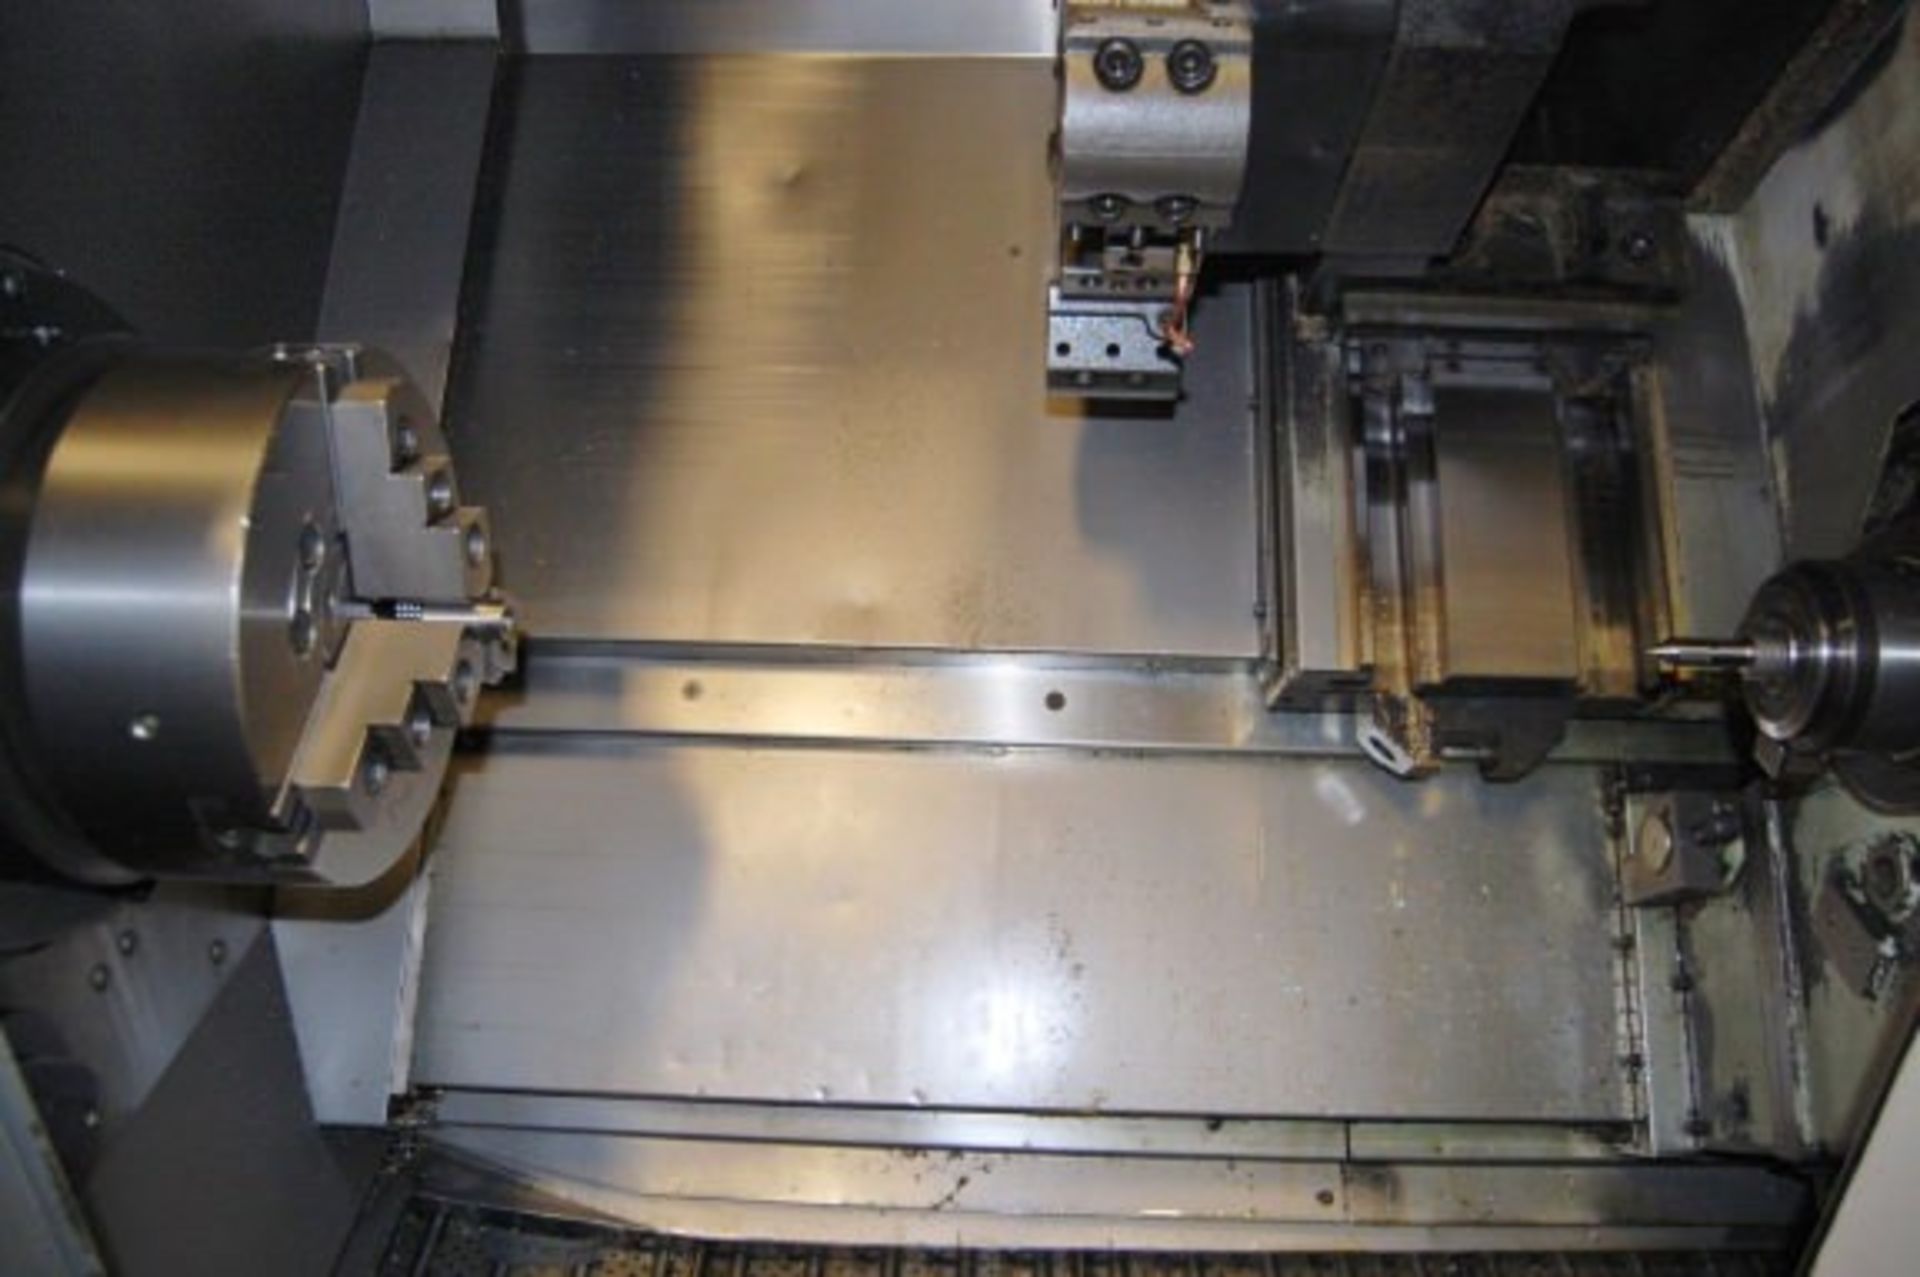 MORI SEIKI SL300A CNC Slant Bed Turning Center, 28.1" Swing Over Bed, 19.7"   Swing Over Cross - Image 6 of 10